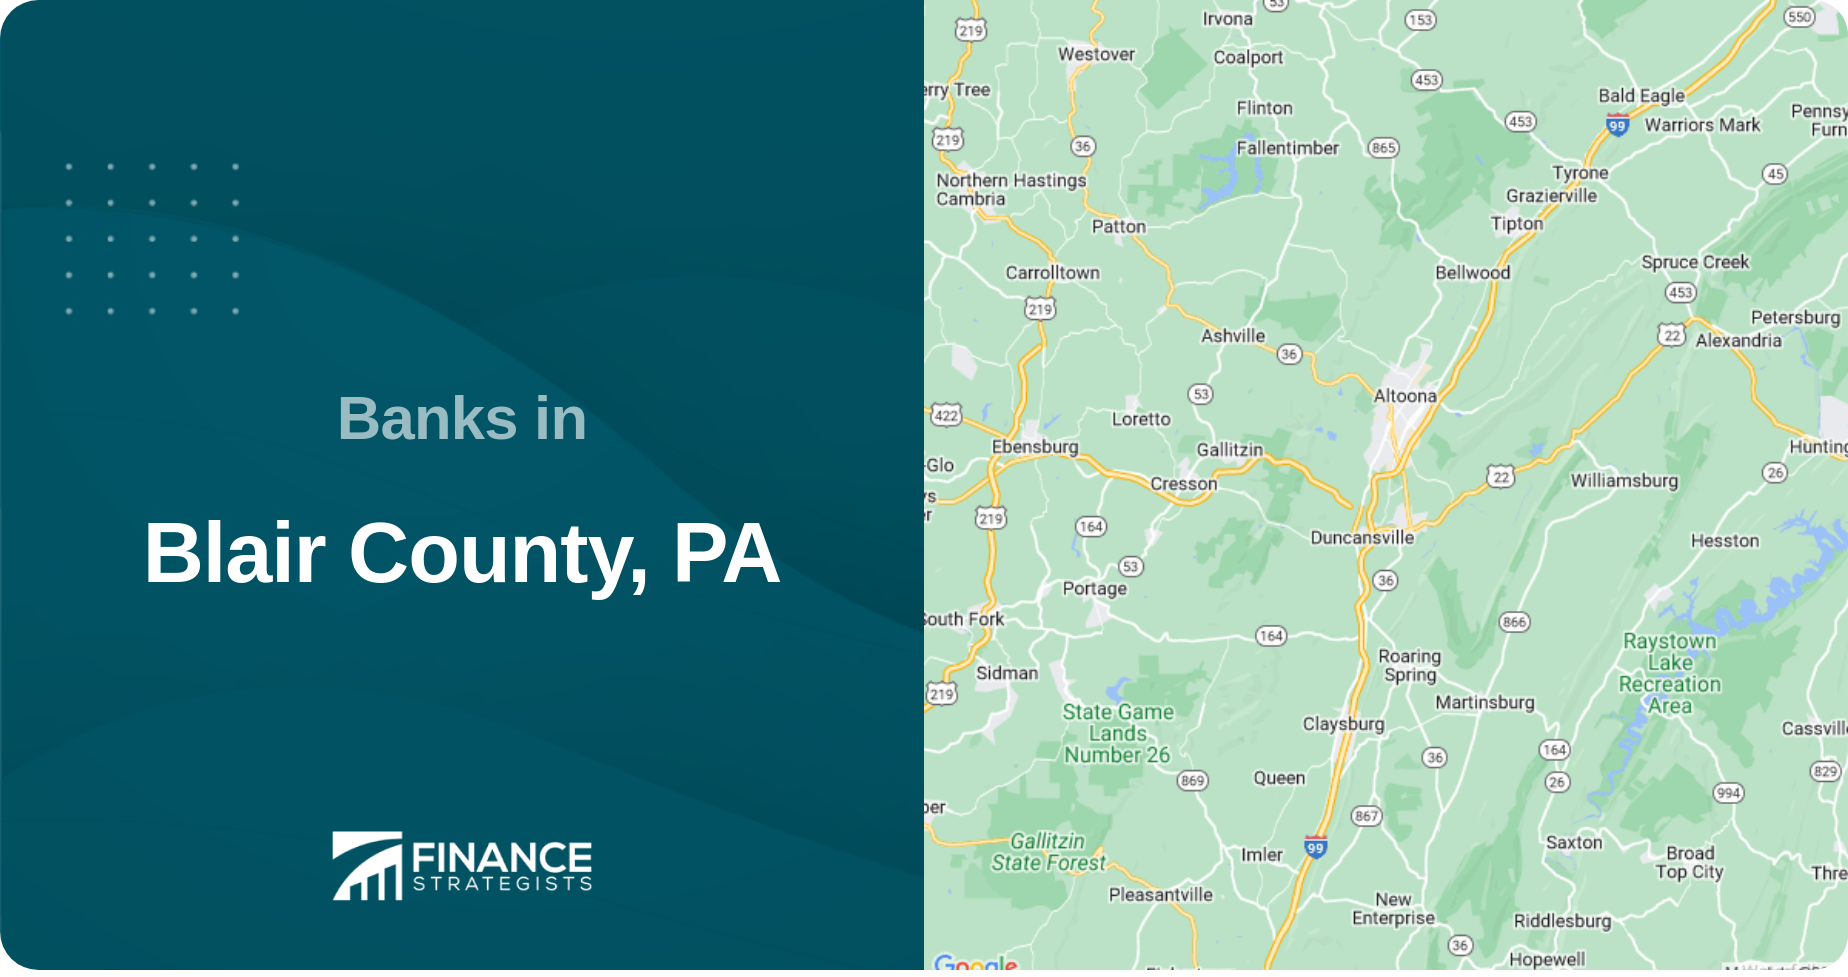 Banks in Blair County, PA